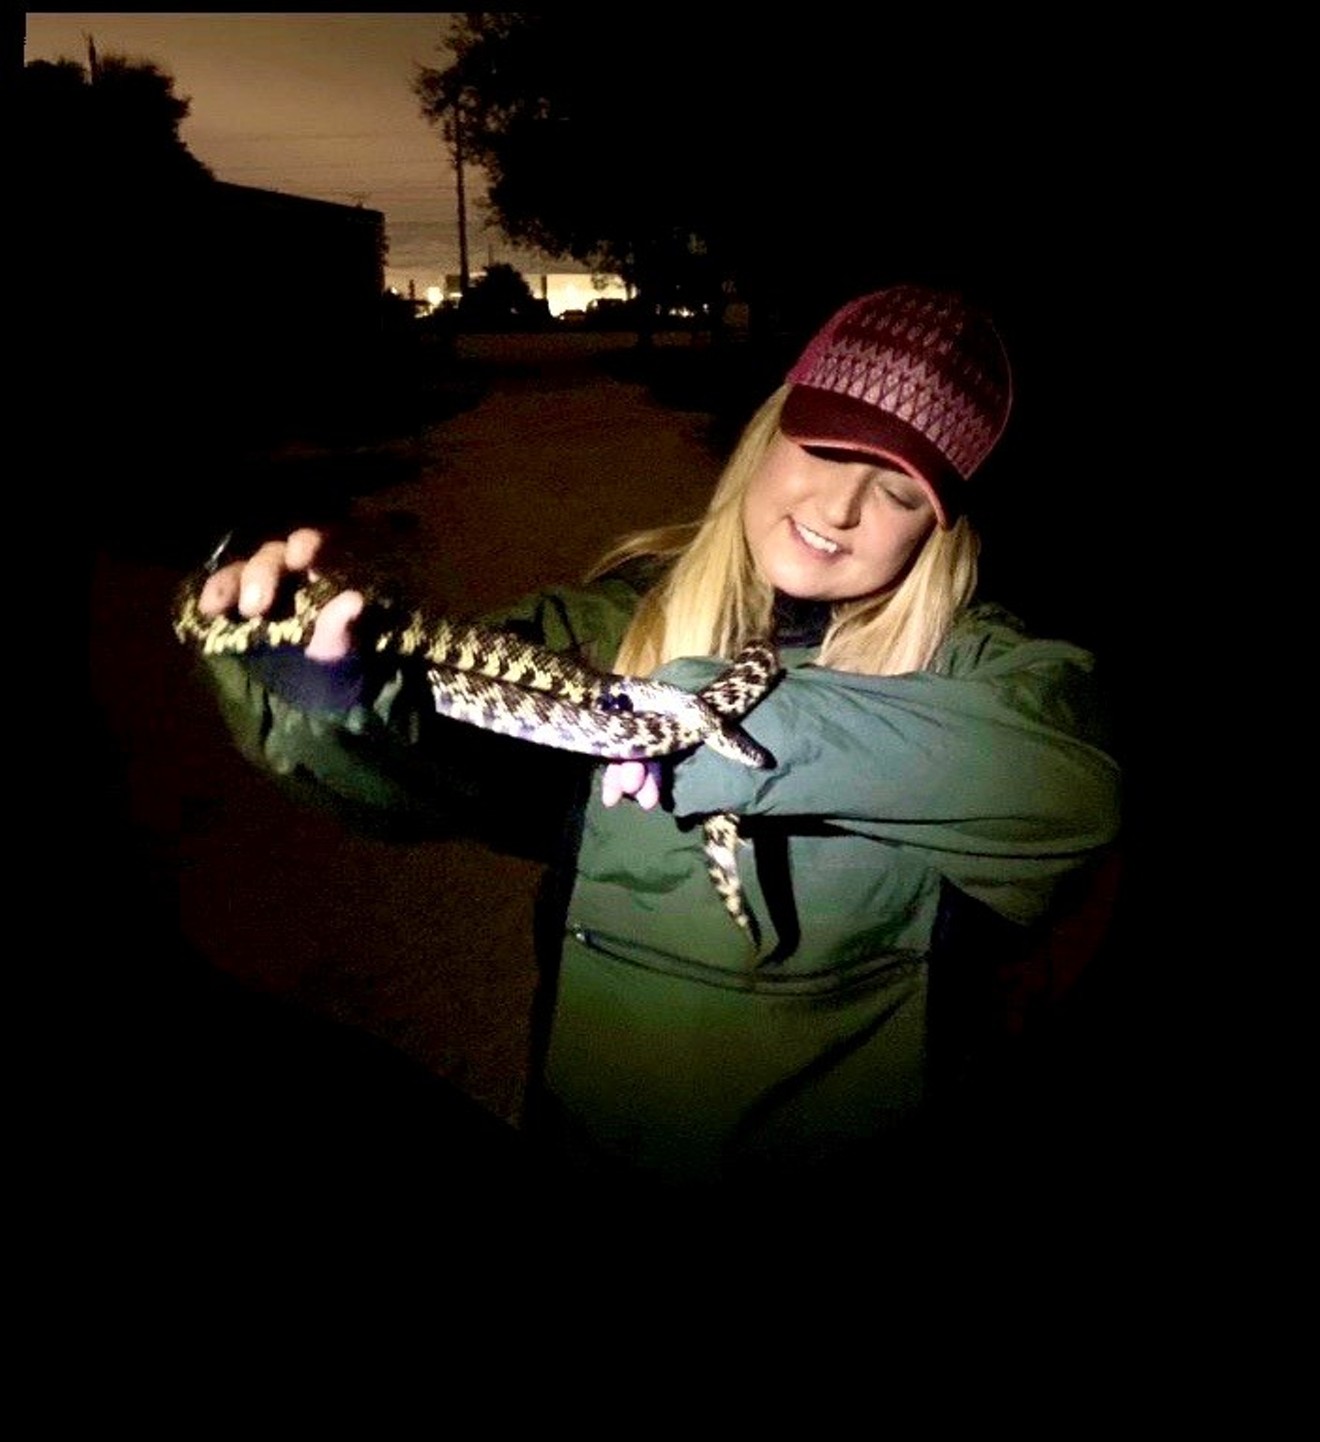 Invasive-species researcher Melissa Miller authored a new study on lung parasites infecting reptiles in the Everglades.